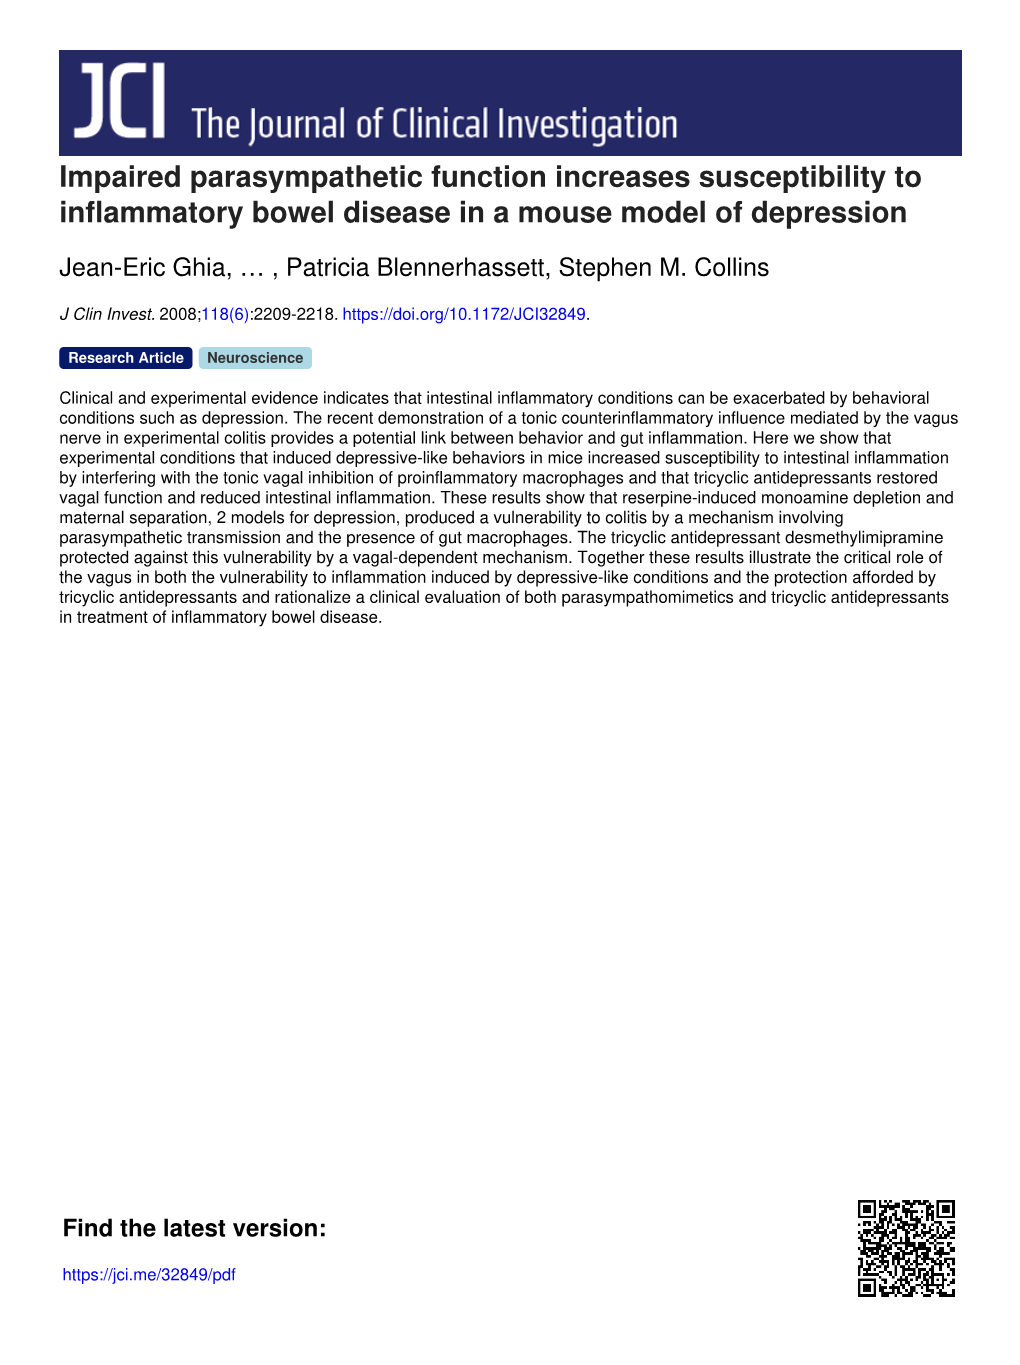 Impaired Parasympathetic Function Increases Susceptibility to Inflammatory Bowel Disease in a Mouse Model of Depression